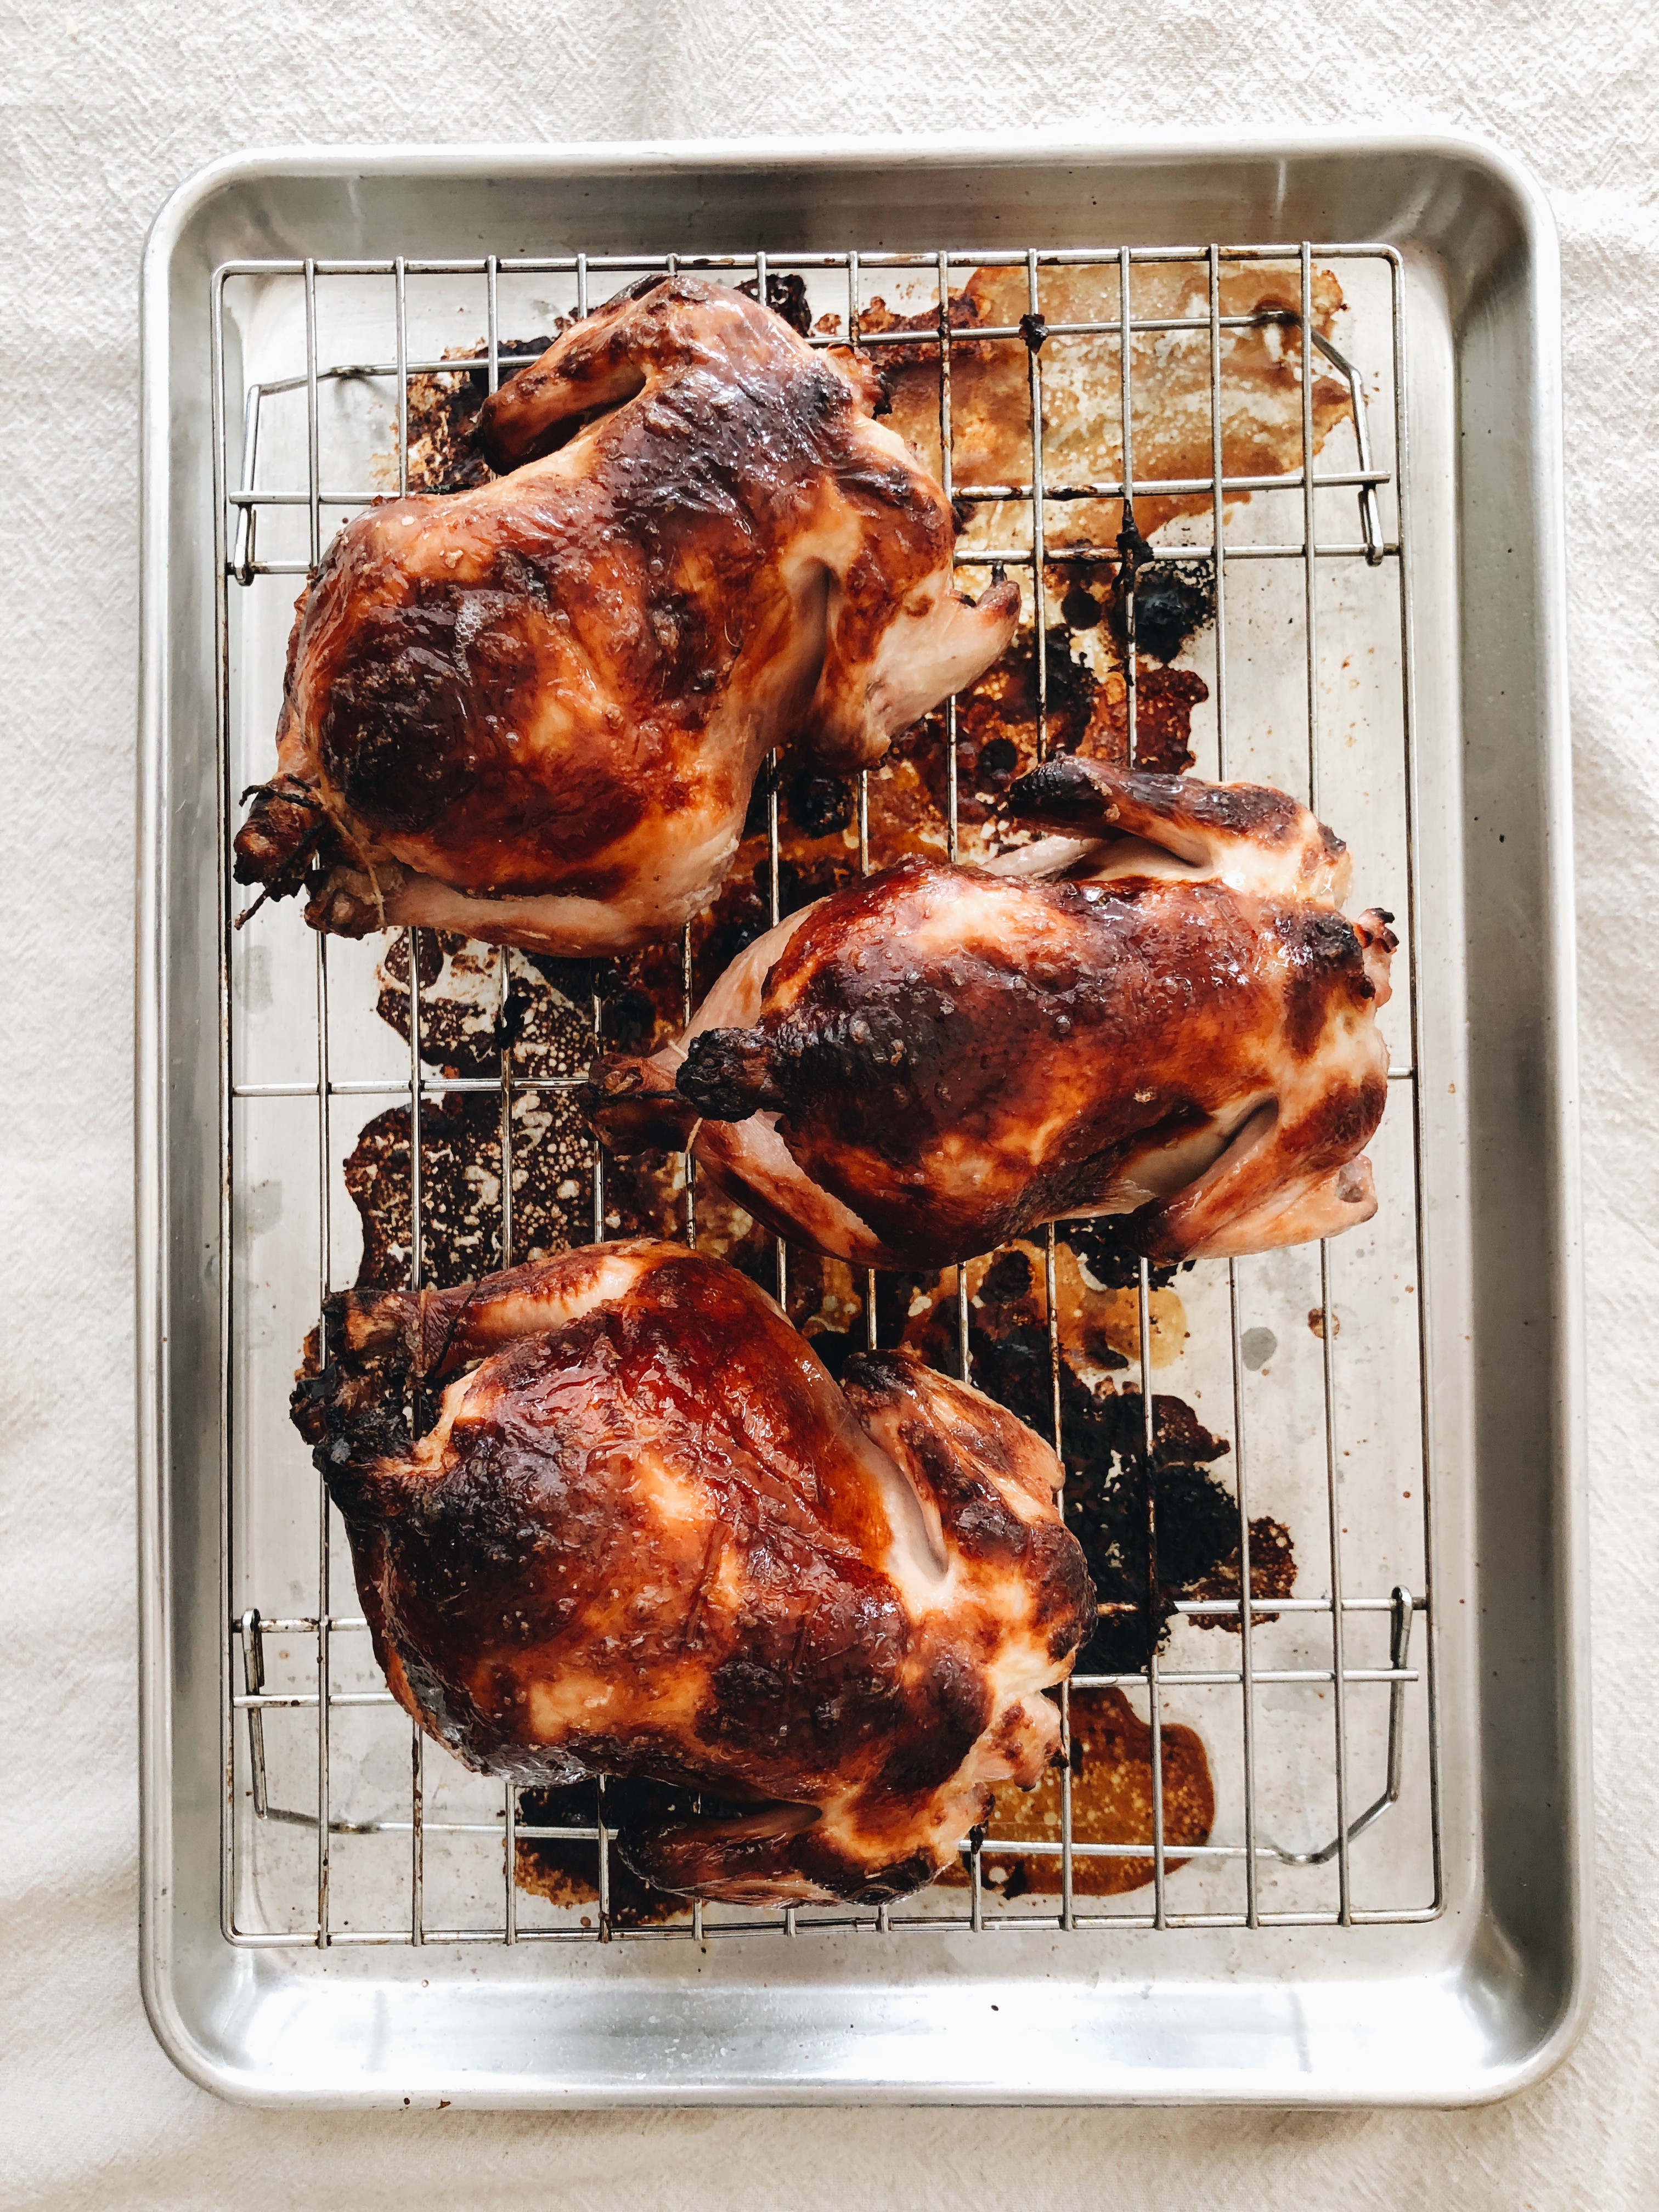 Buttermilk-Brined Cornish Game Hens with a Rustic Kale Gratin / Bev Cooks